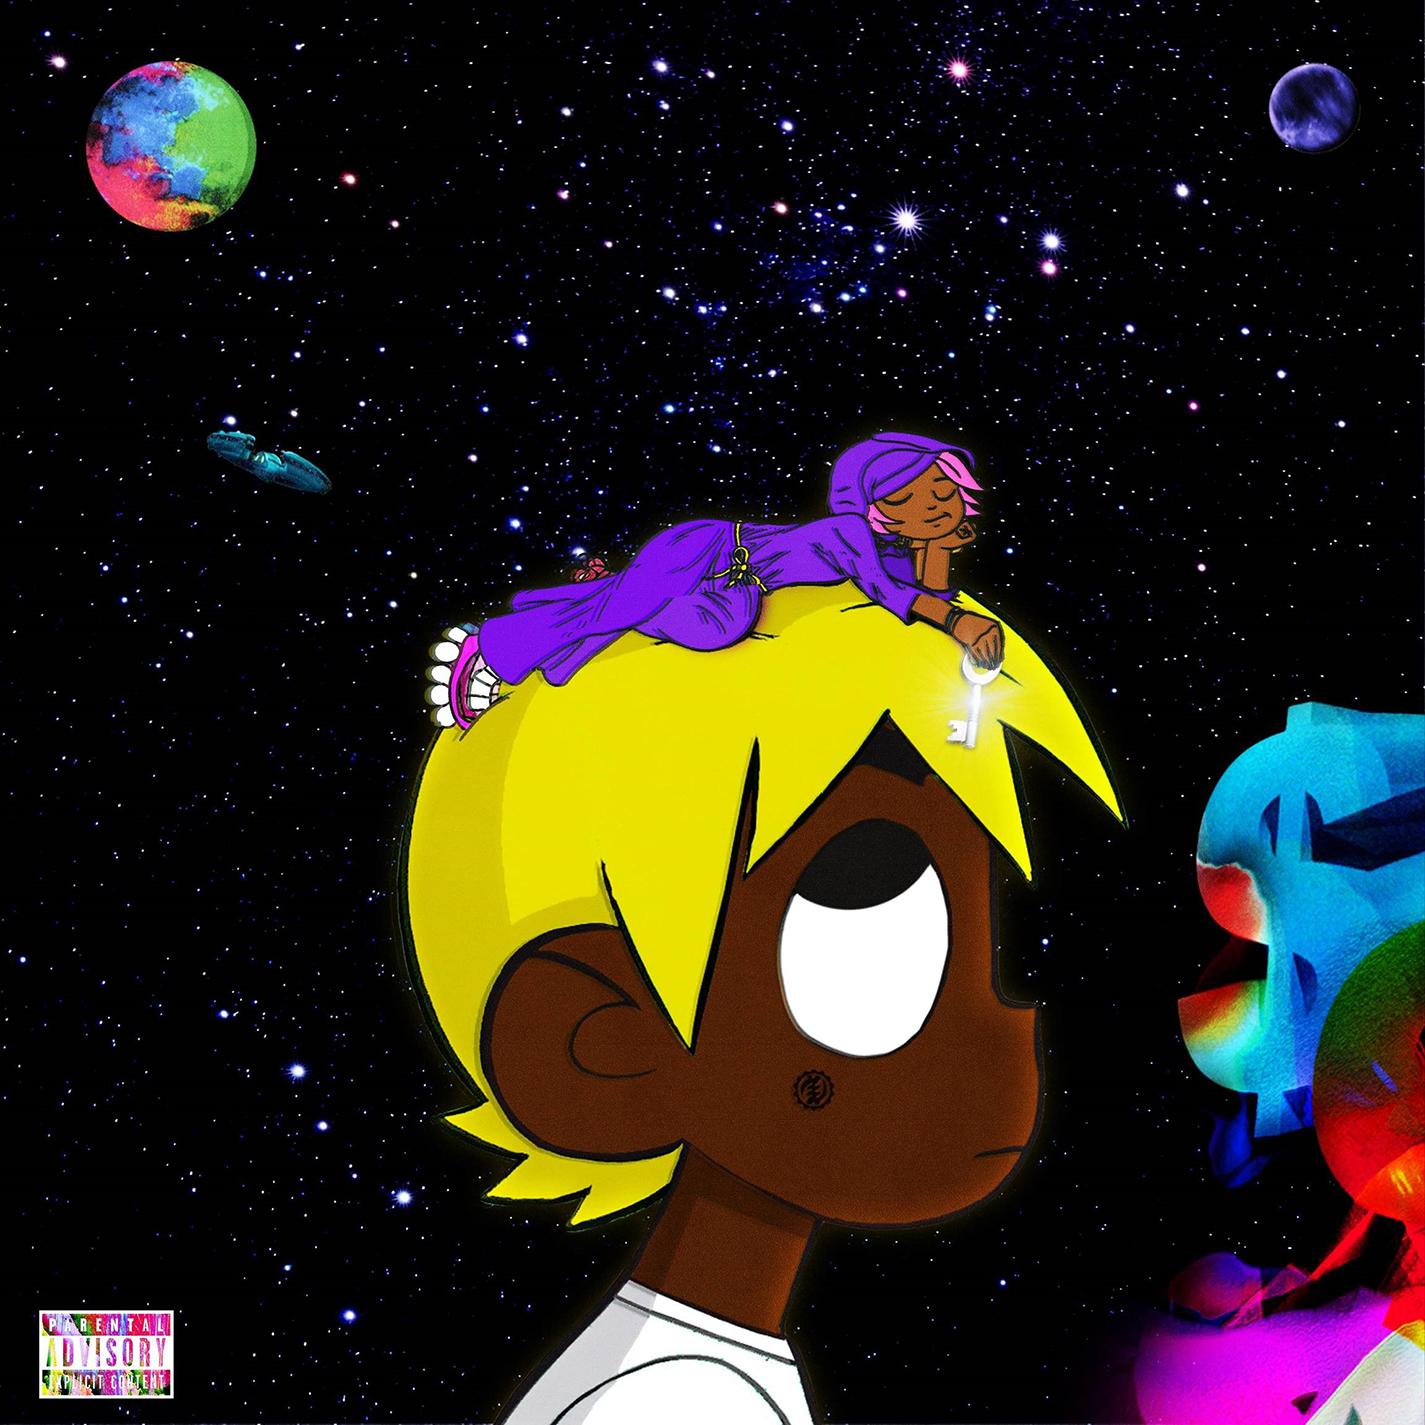 Trap This Way (This Way)歌词 歌手Lil Uzi Vert-专辑Eternal Atake (Deluxe) - LUV vs. The World 2-单曲《Trap This Way (This Way)》LRC歌词下载